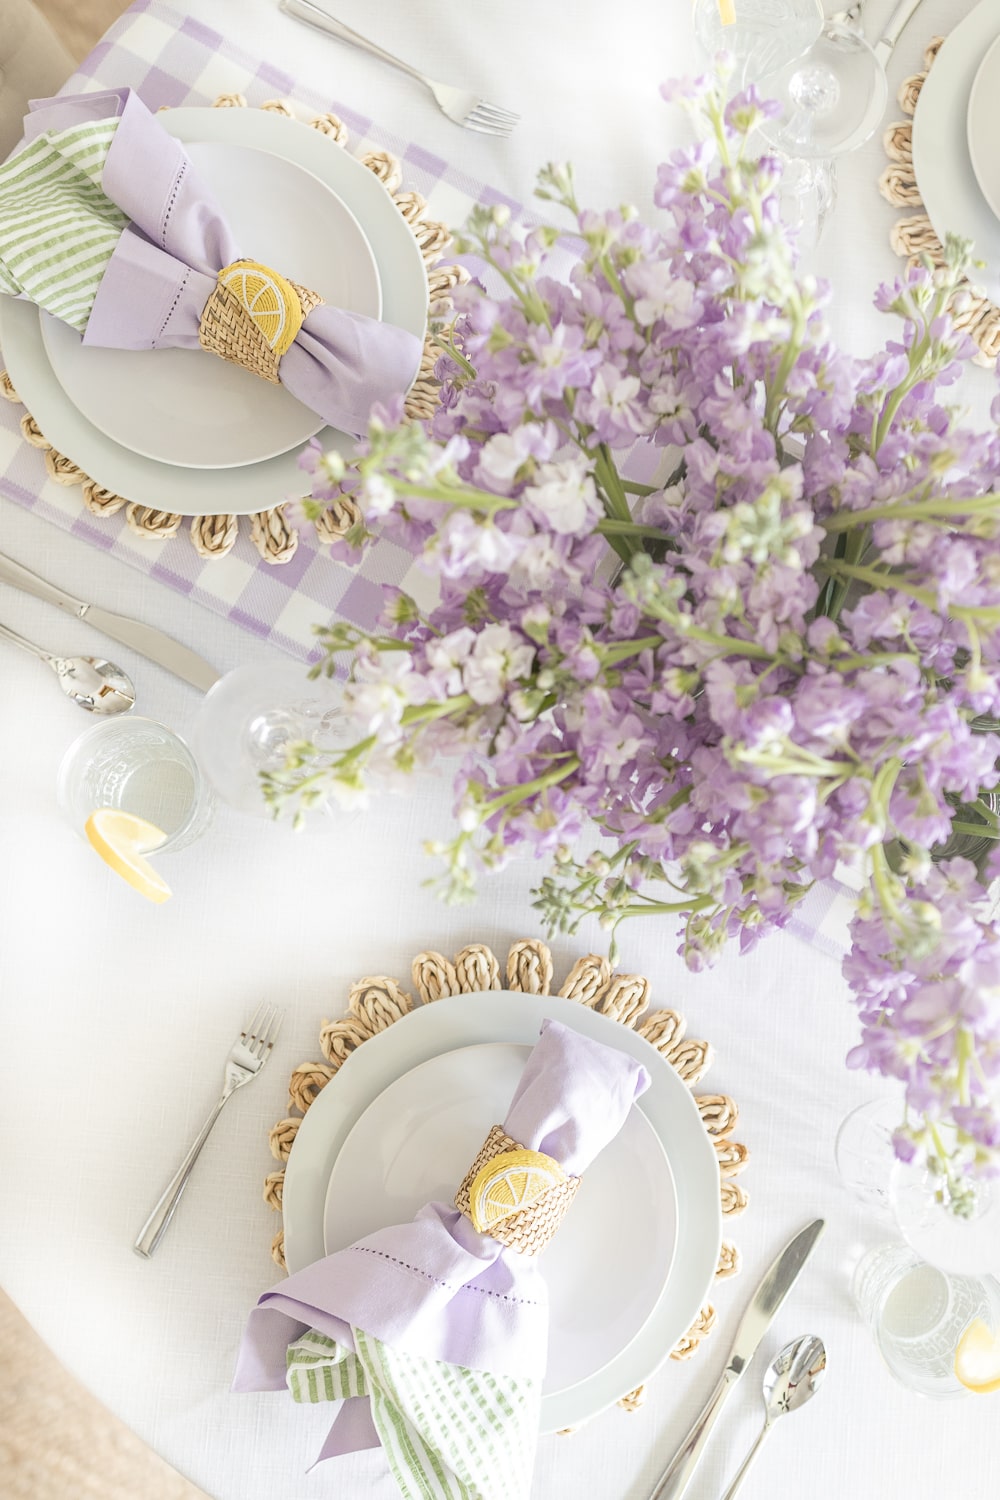 Lavender table decor styled in a simple Mothers Day tablescape by blogger Stephanie Ziajka on Diary of a Debutante